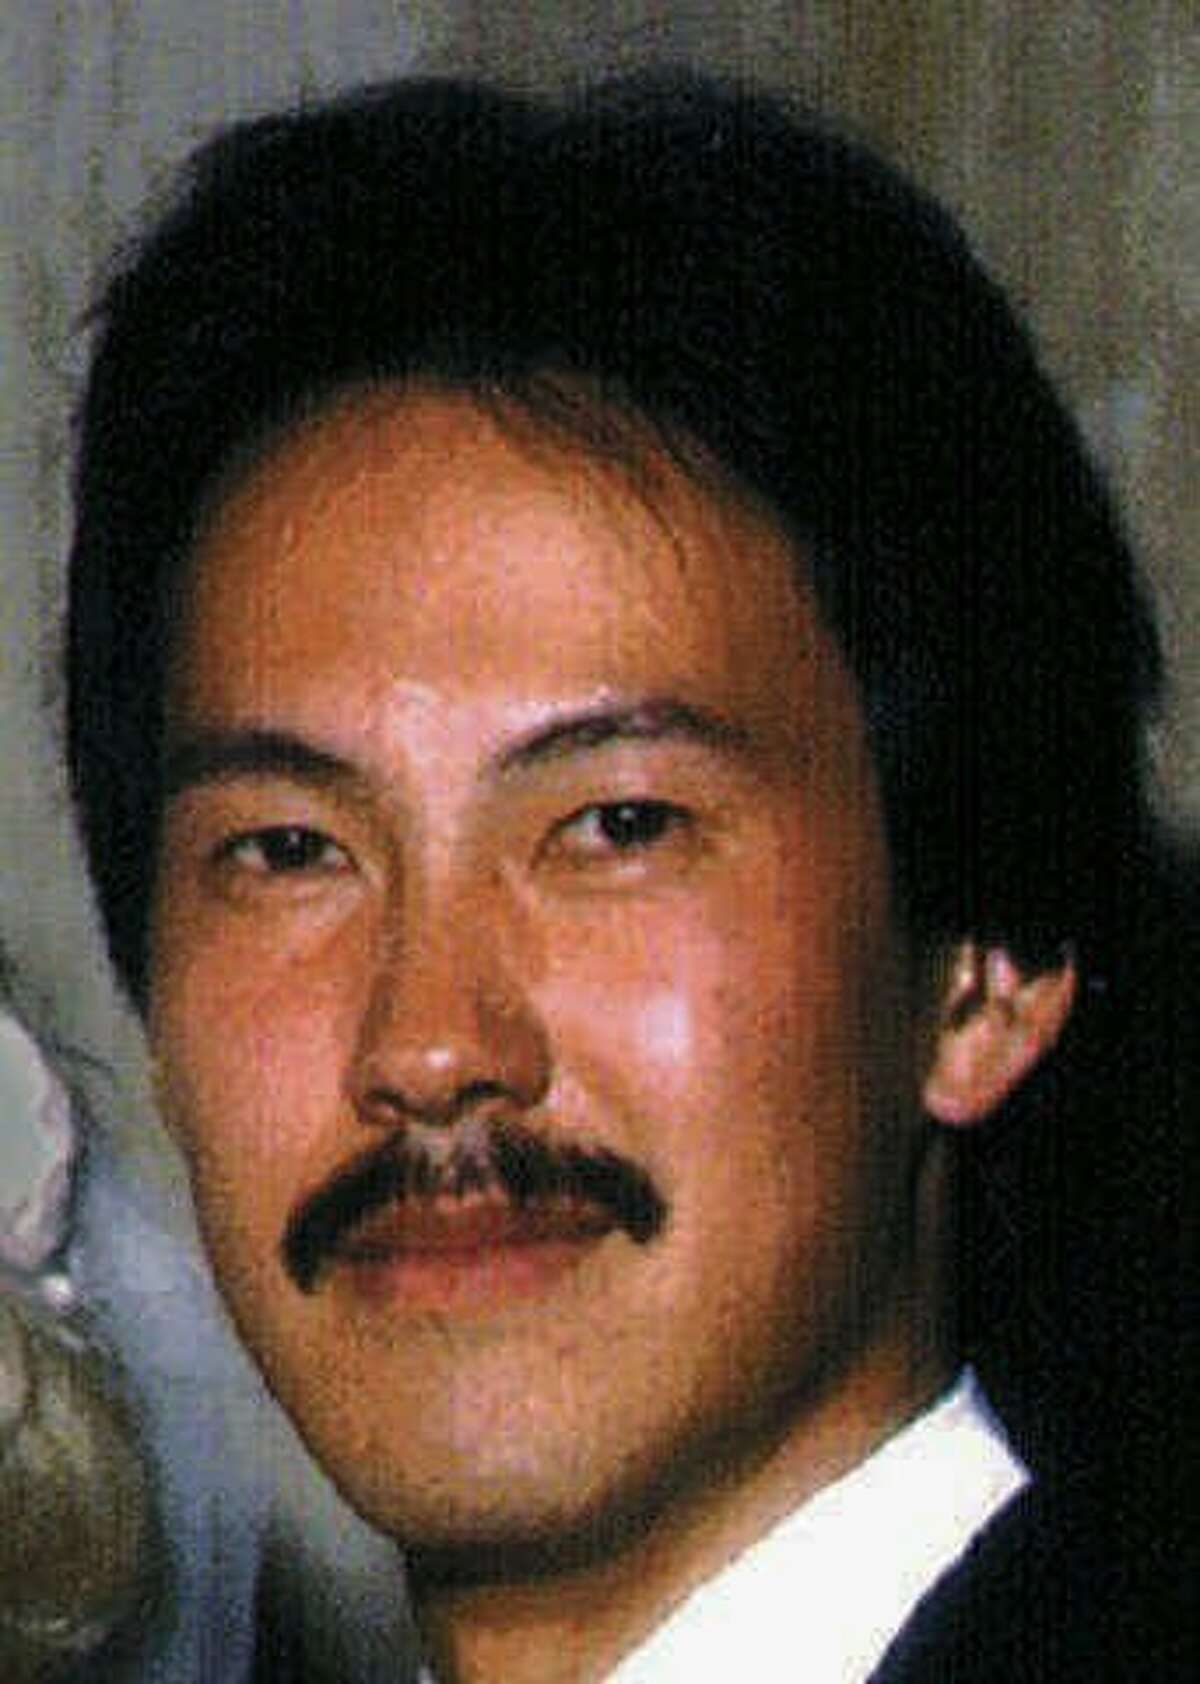 Martin Pang, pictured in a file photo.